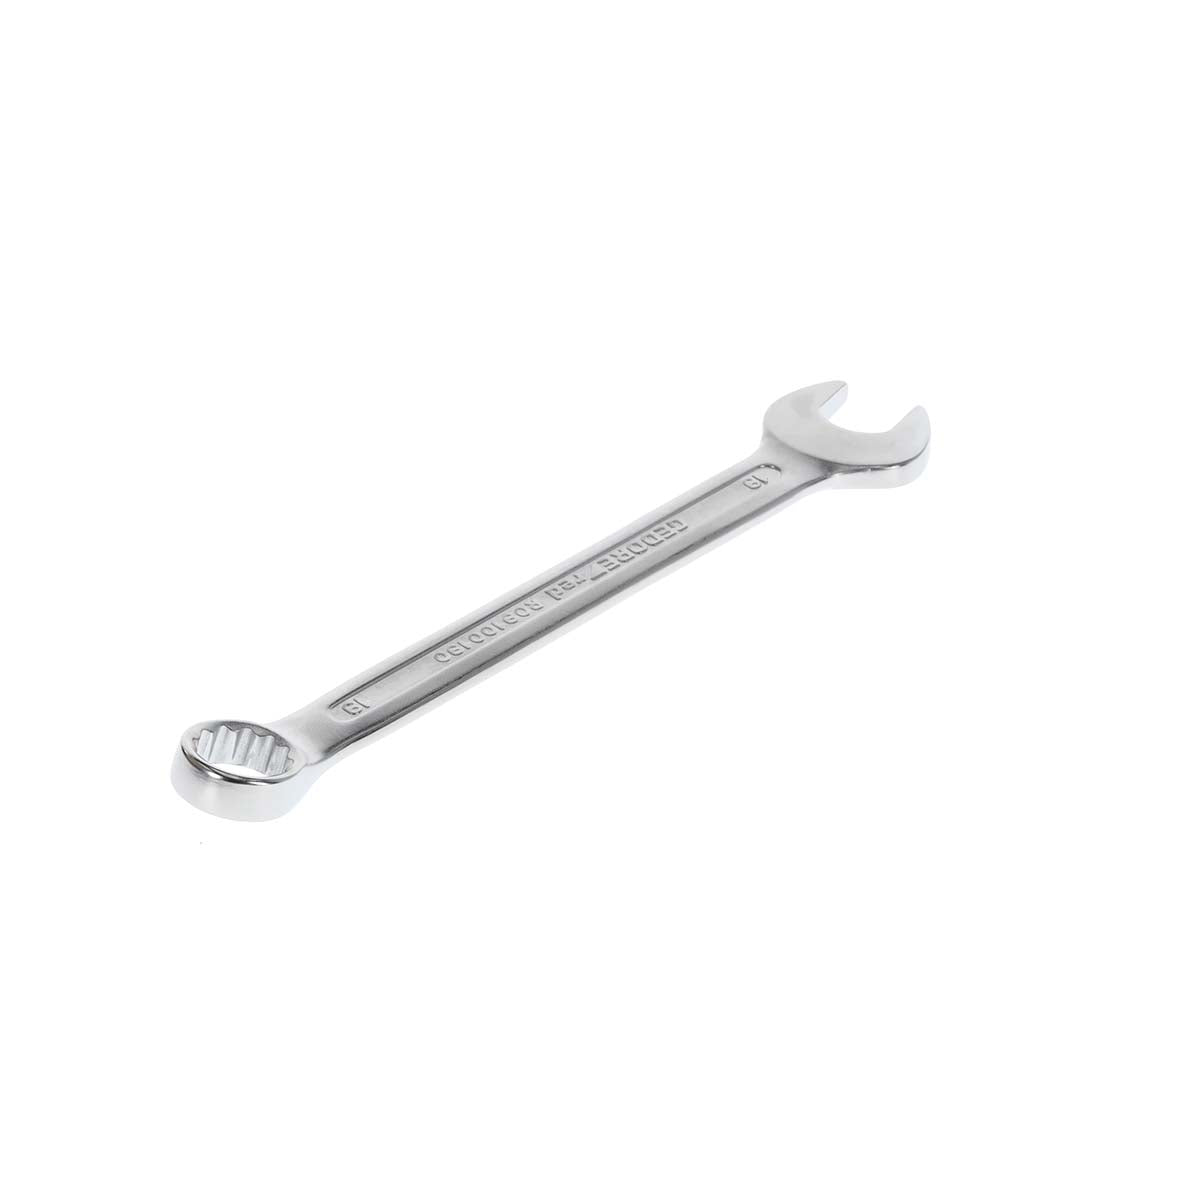 GEDORE red R09100190 - Combination wrench 19 mm L=230 mm (3300975)